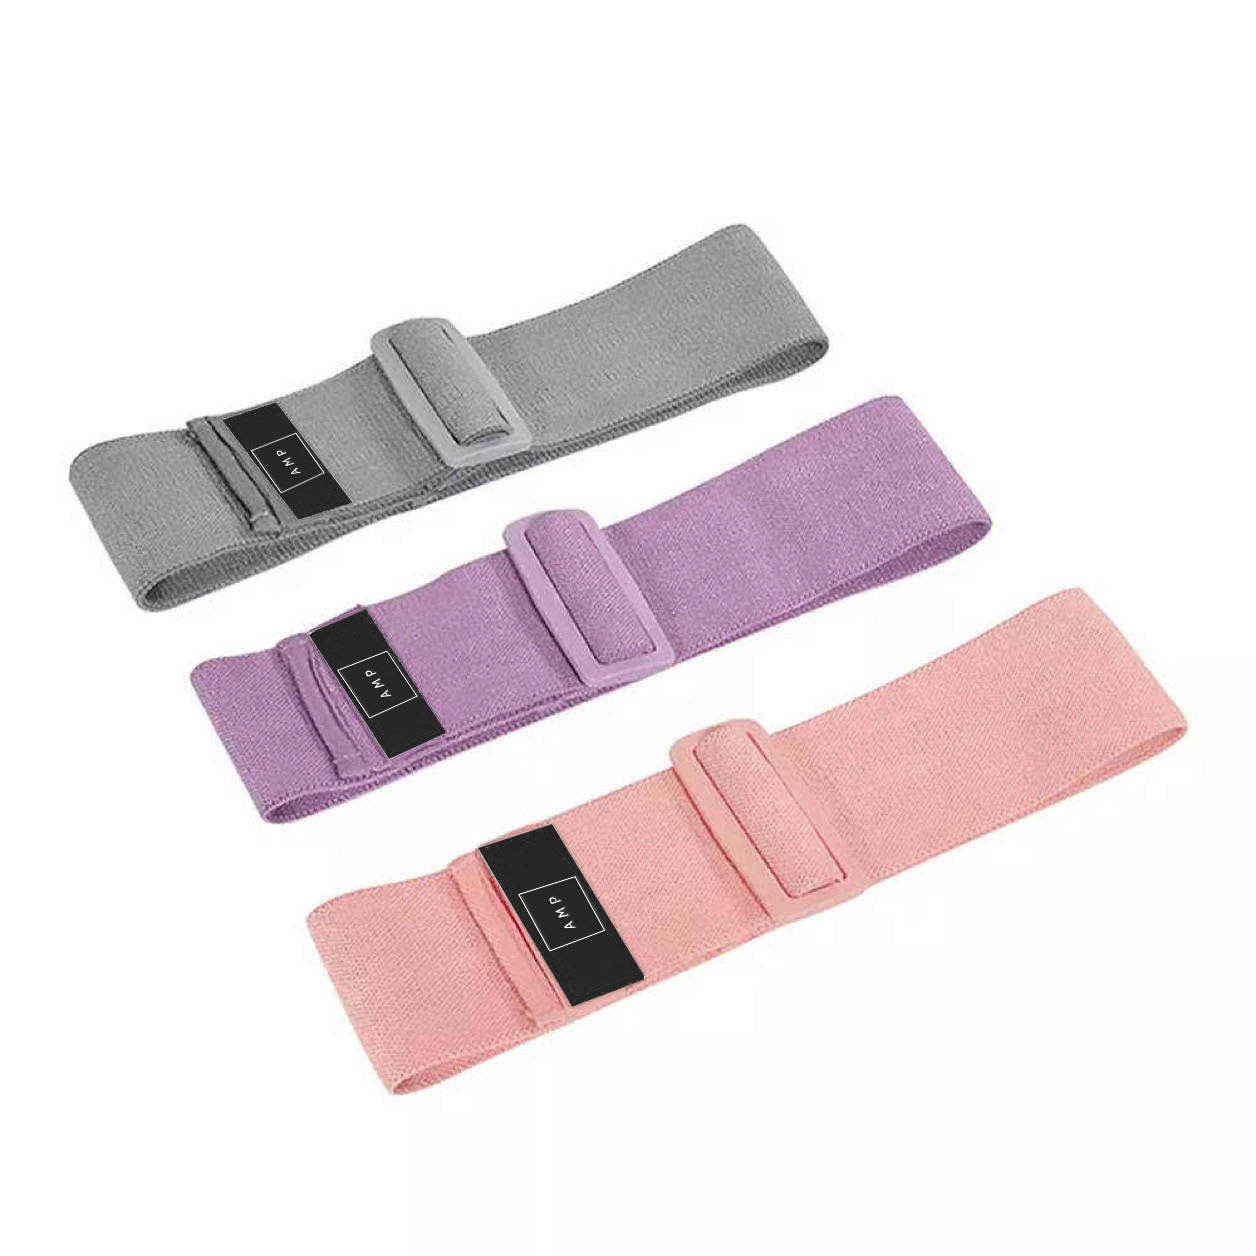 Adjustable Fabric Resistance Bands – AMP Wellbeing